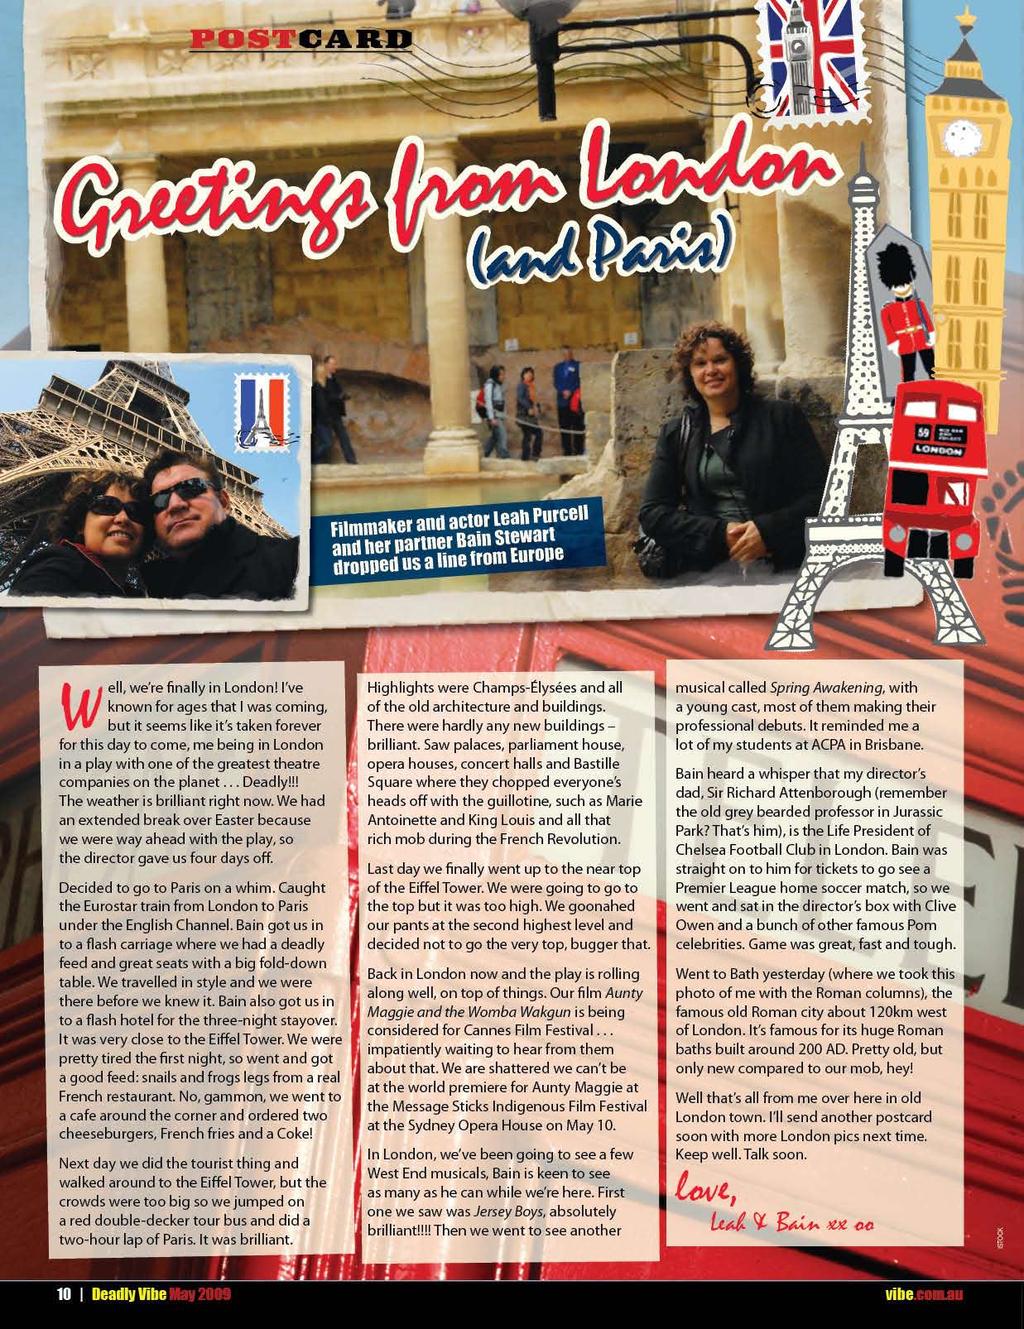 My name Greetings from London pg 10 Film maker and actor Leah Purcell and her partner Bain Stewart are visiting Europe while Leah rehearses for a play.